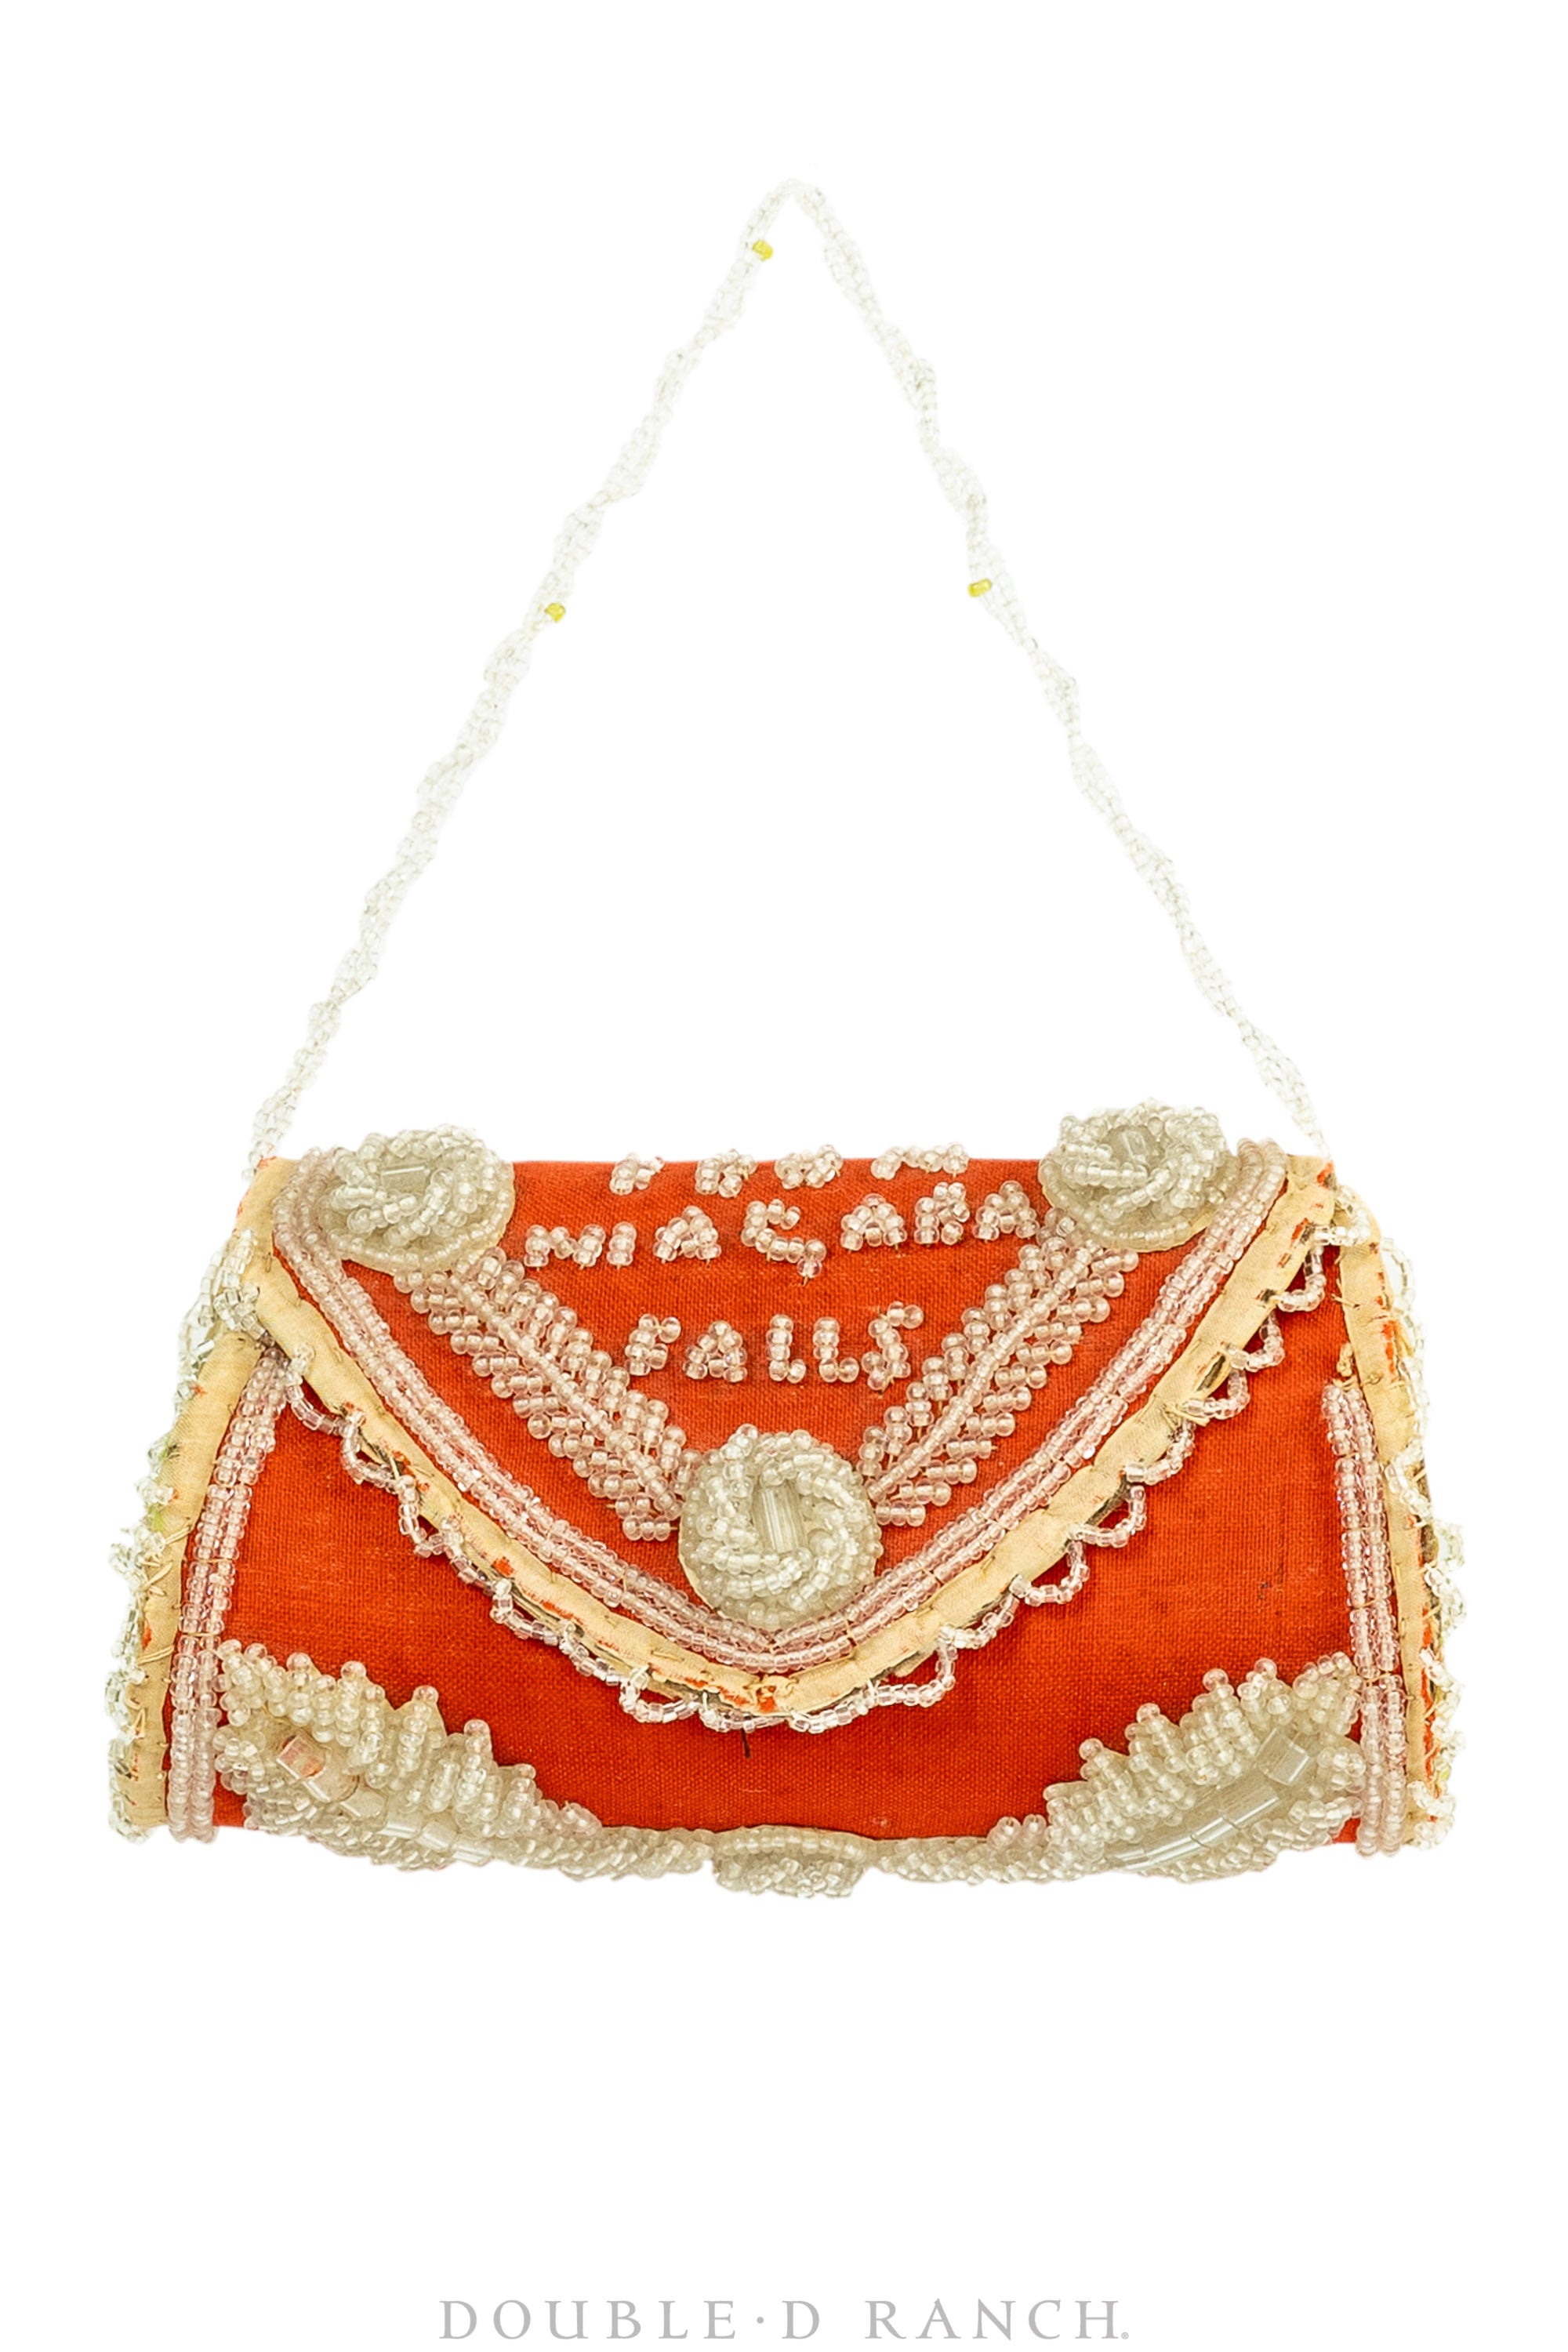 Whimsey, Purse, "From Niagara Falls", Vintage, Turn of the Century, 317